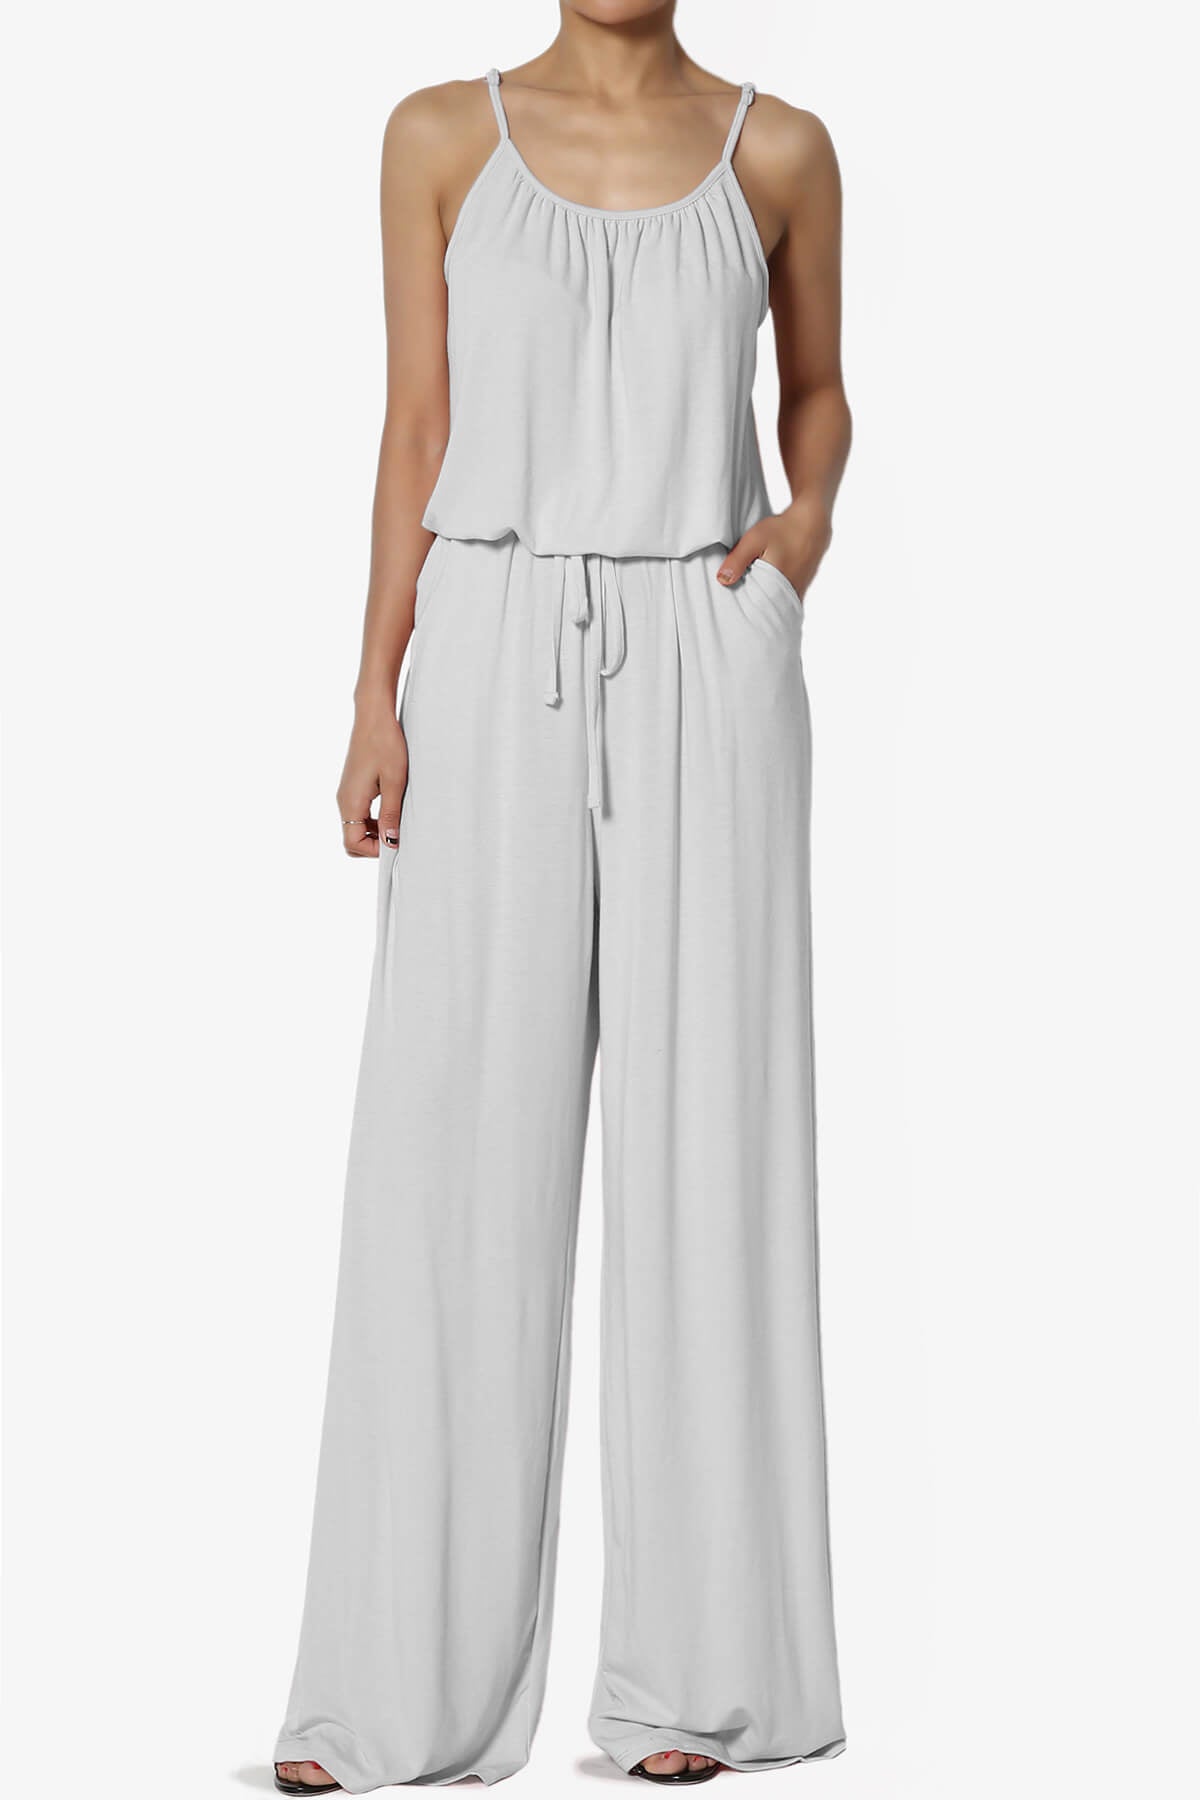 Load image into Gallery viewer, Daelynn Strappy Wide Leg Jumpsuit LIGHT GREY_1
